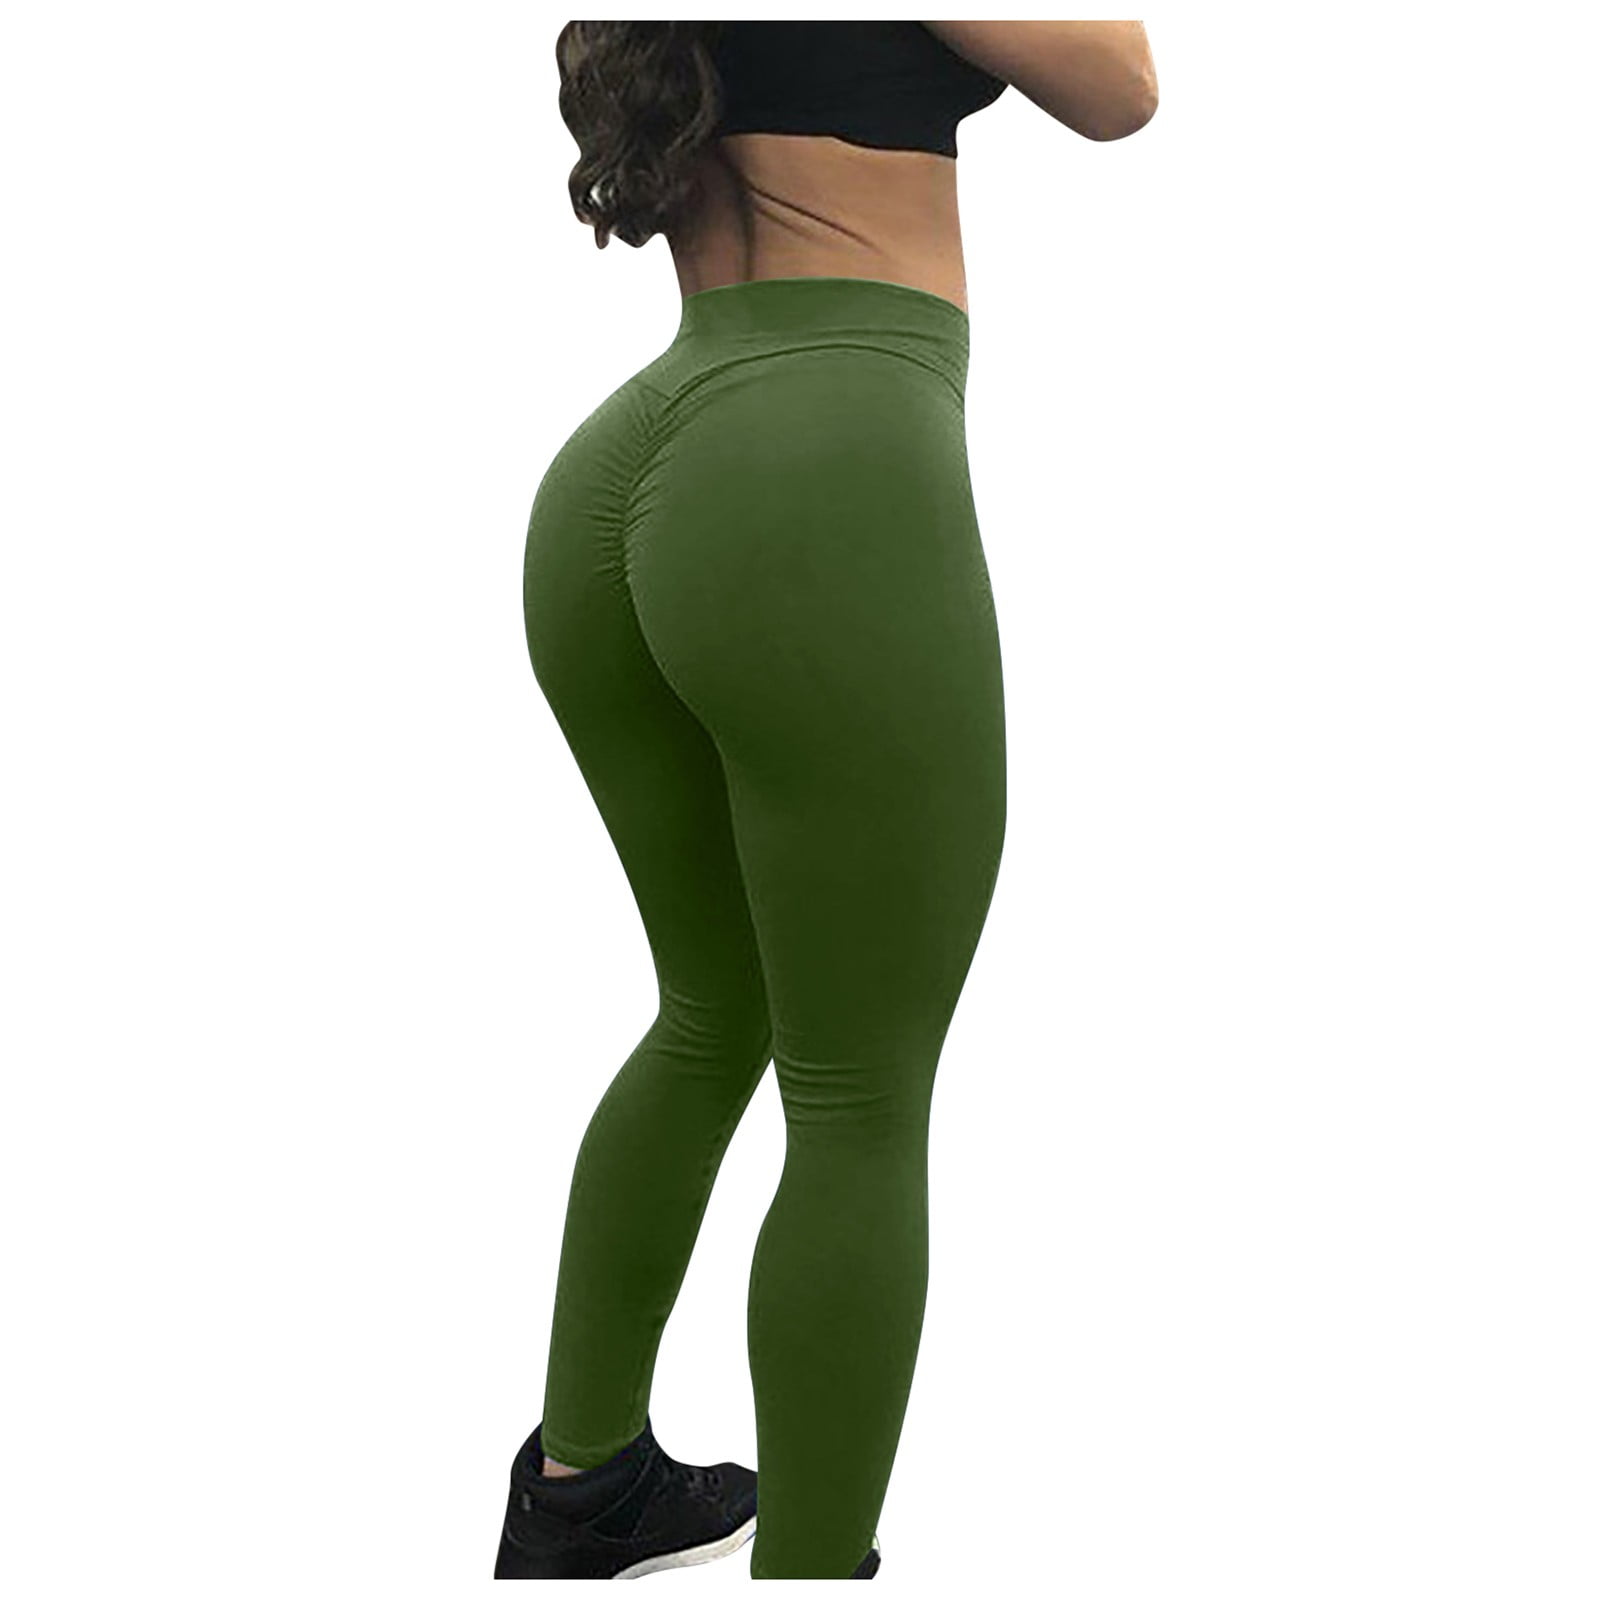 Women's Yoga Pants Side Pockets Wide Leg High Waist Yoga Fitness Gym Workout  Bottoms Dark Grey Black Army Green Sports Activewear Stretchy Loose Fit